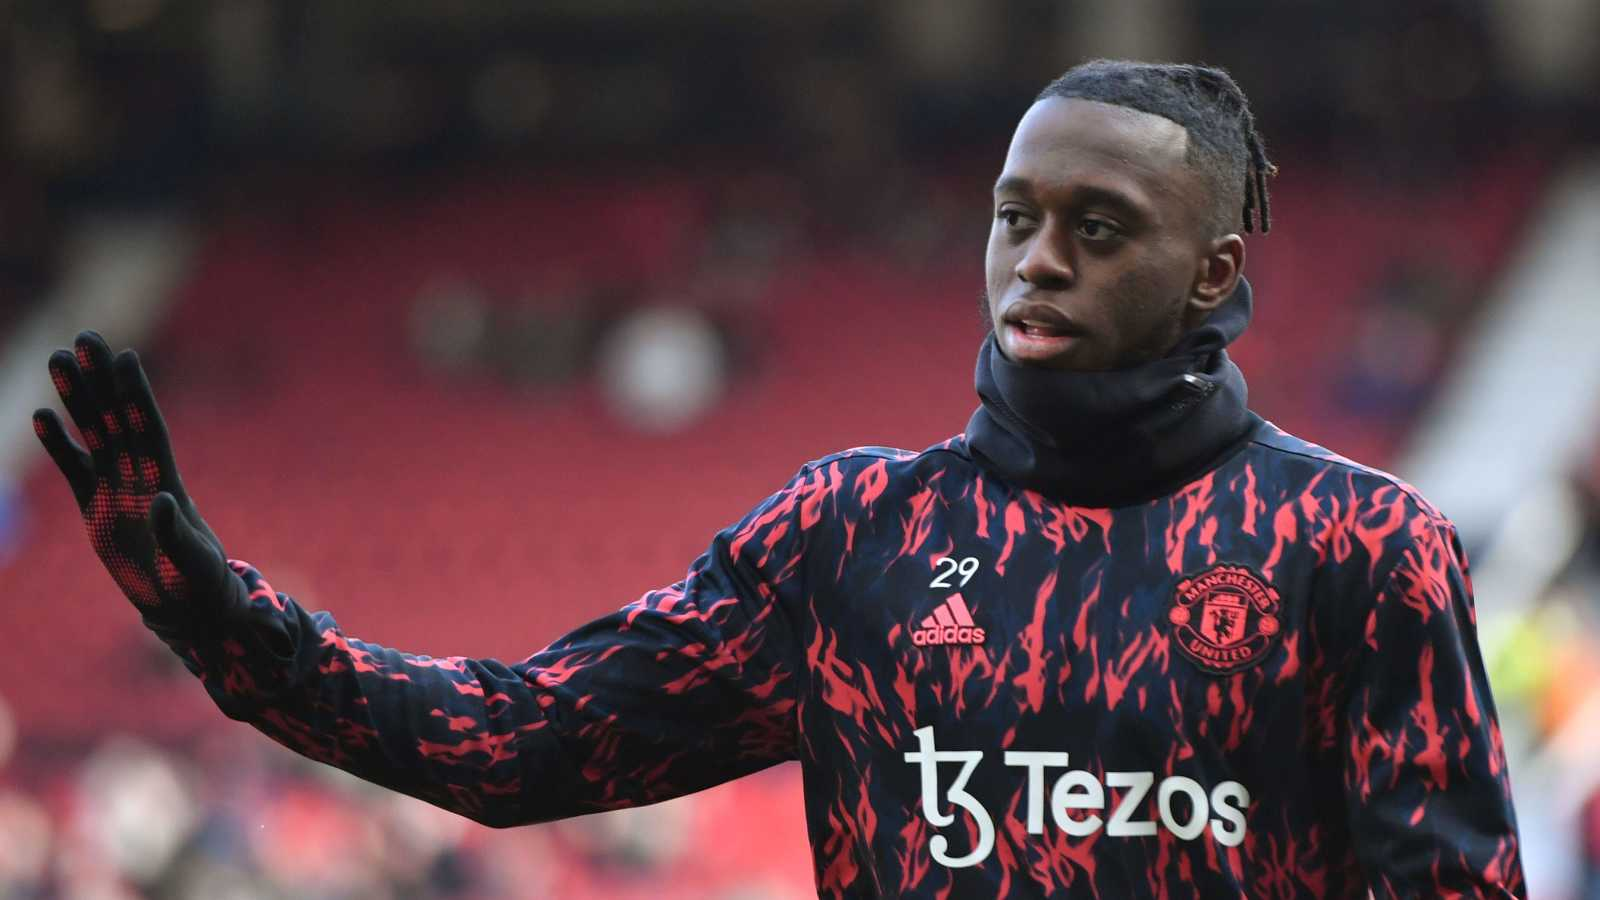 Wan-Bissaka’s style of play has been deemed more defensive, something that might suit Atletico Madrid’s style of play